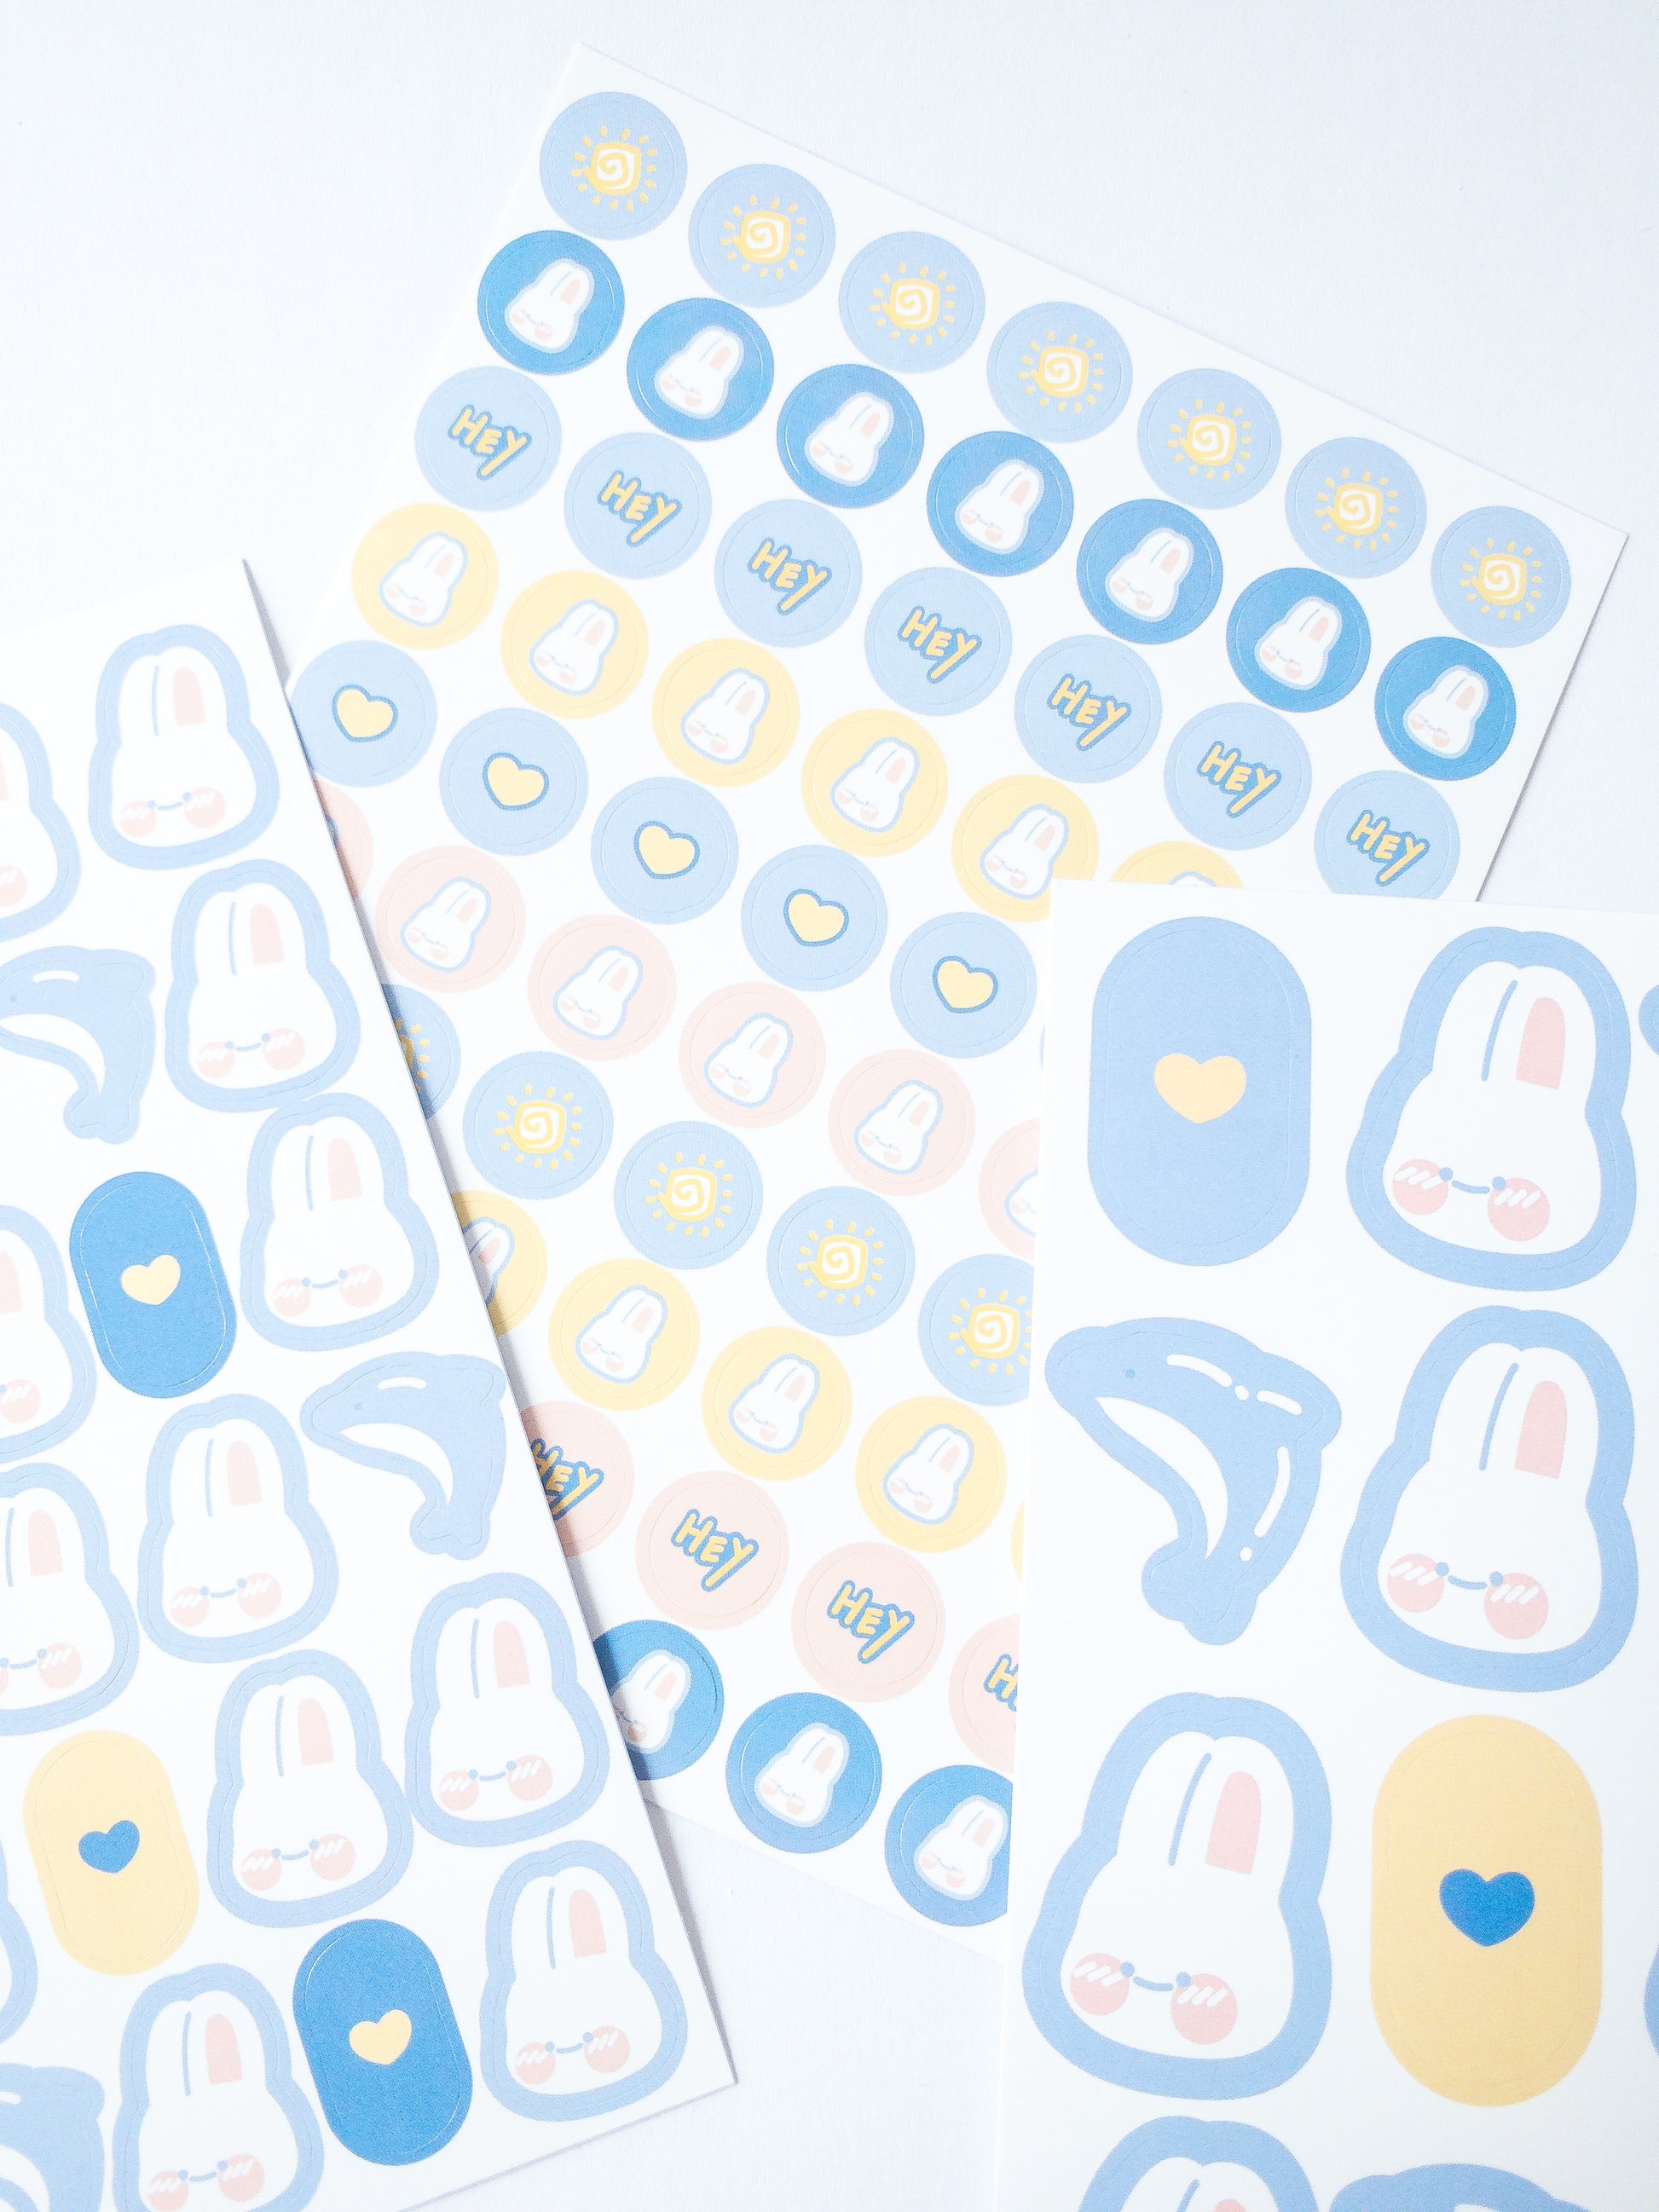 122 Korean style stickers! Three sheets of smiley bunnies and dolphins and more. There are 70 mini stickers, 36 medium-sized stickers and 16 large happy, smiley bunnies, dolphins and hearts.